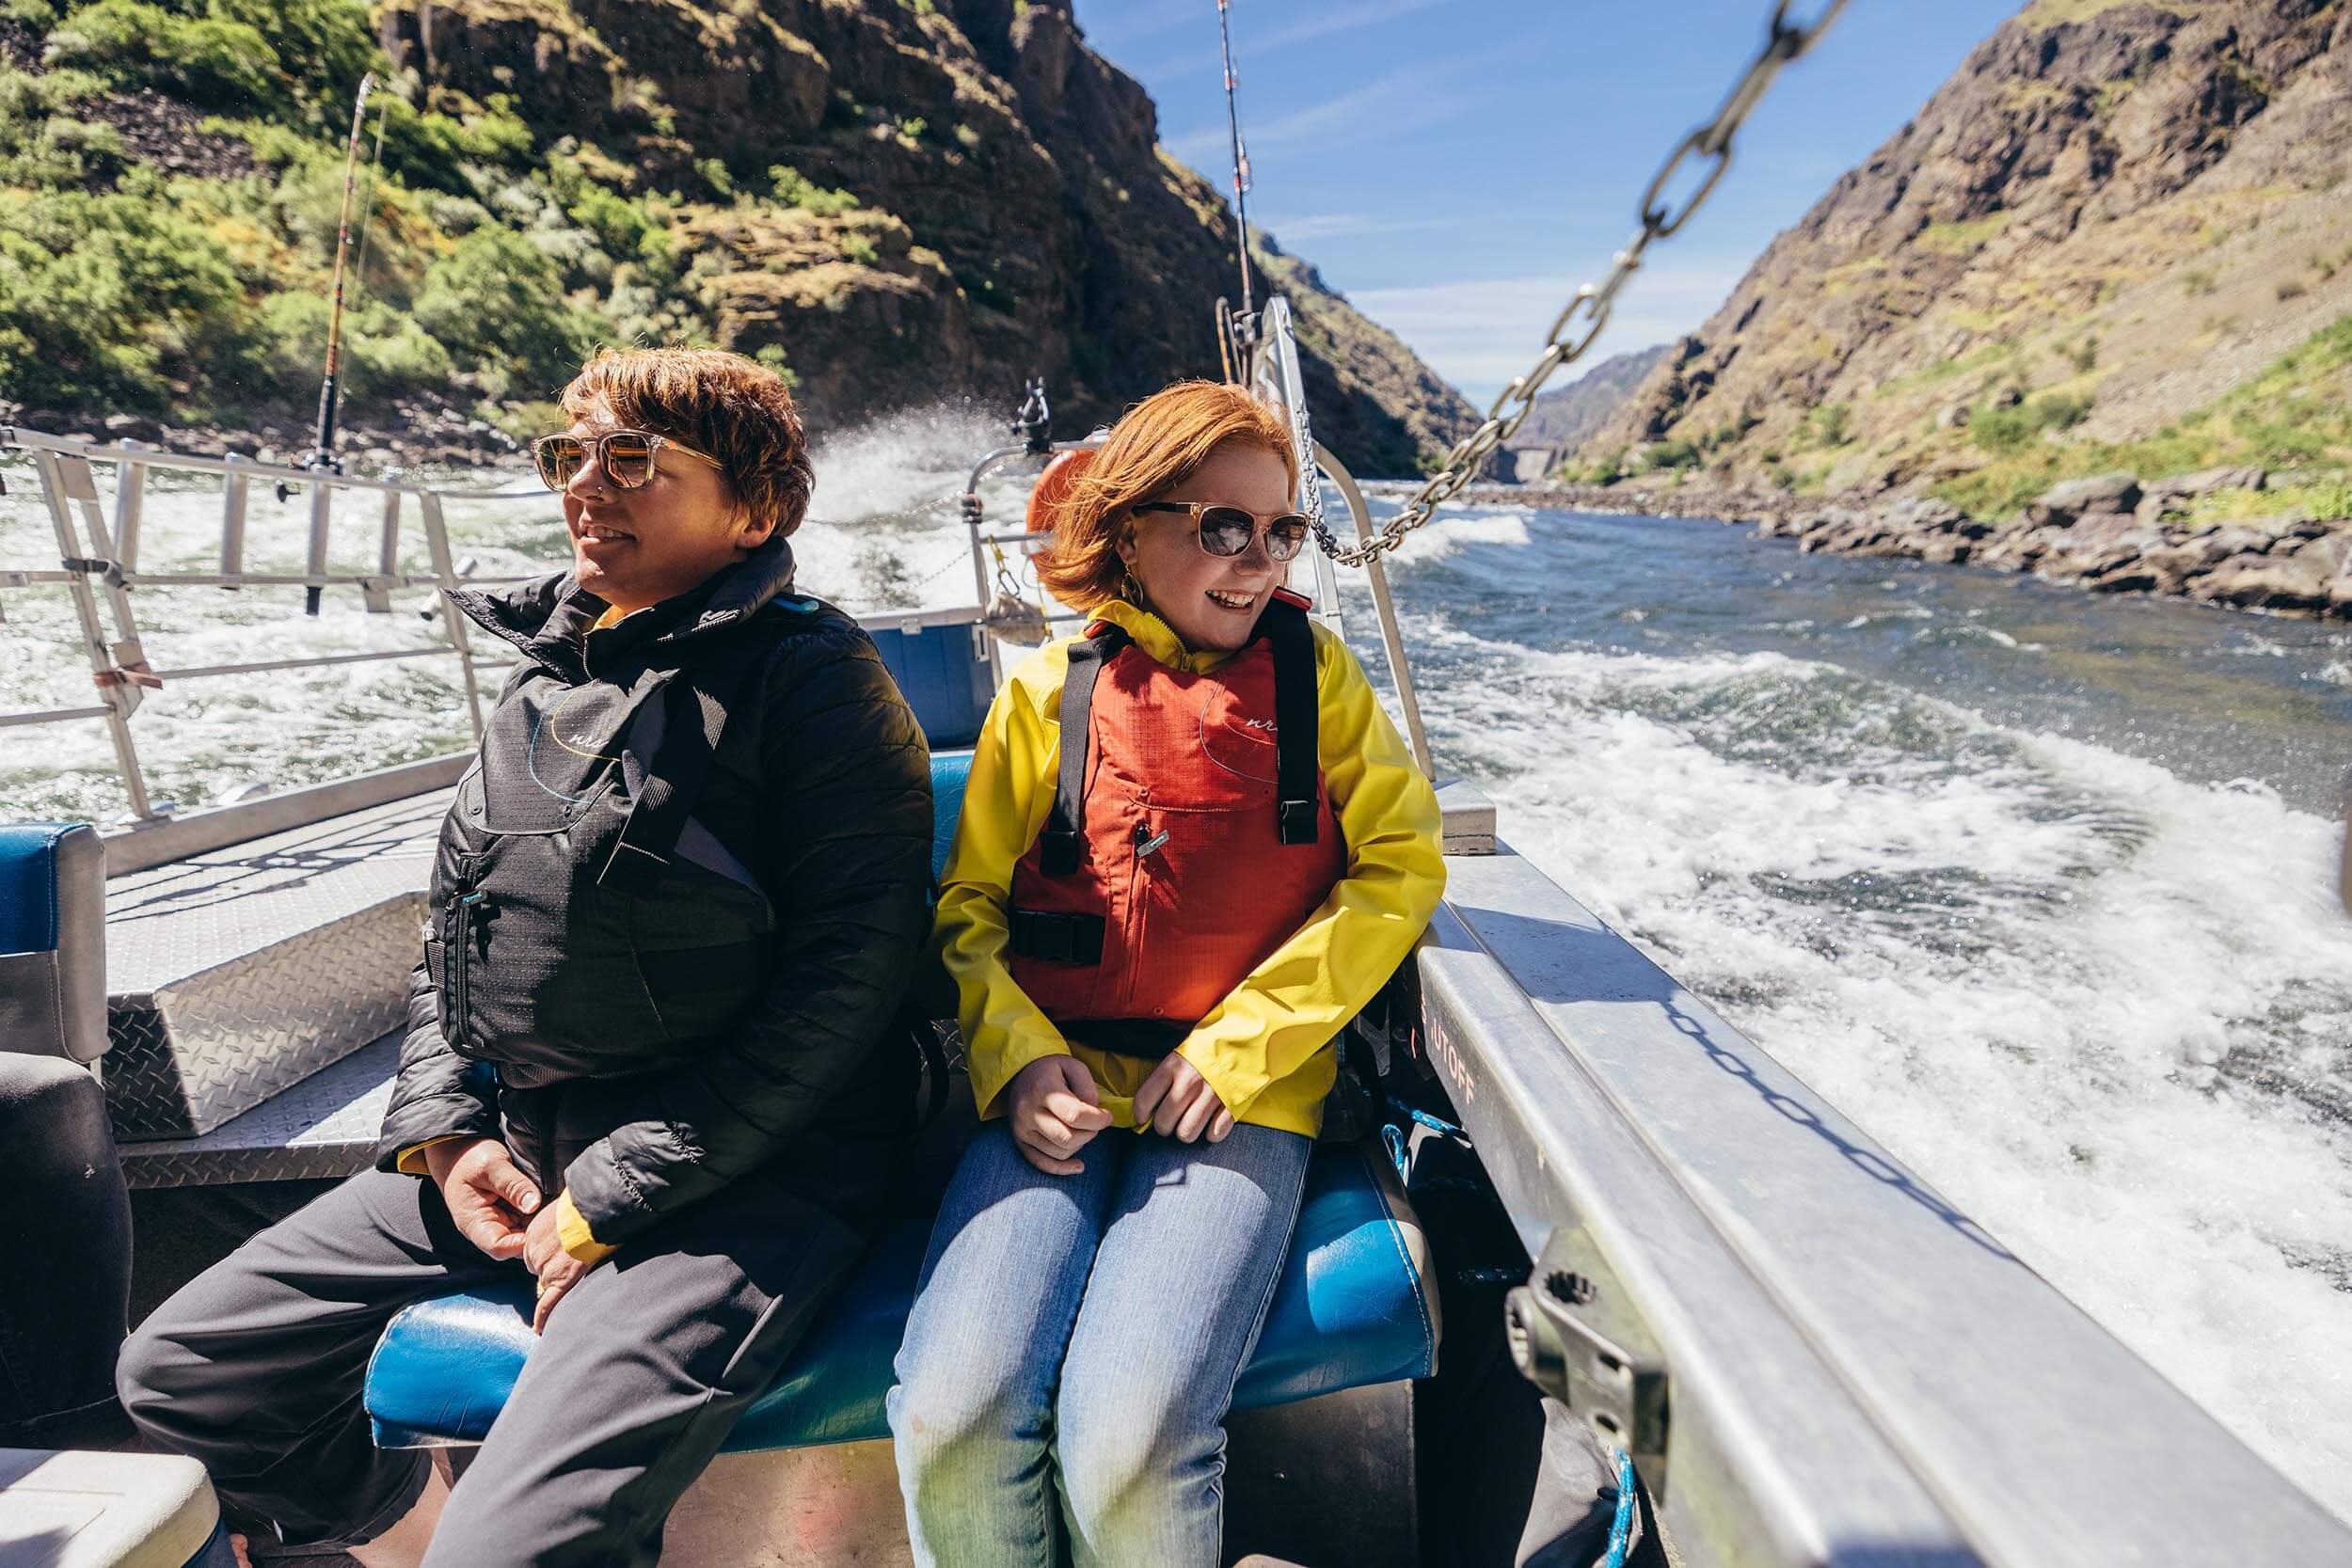 two people wearing life jackets sitting in a jet boat on a river within a canyon